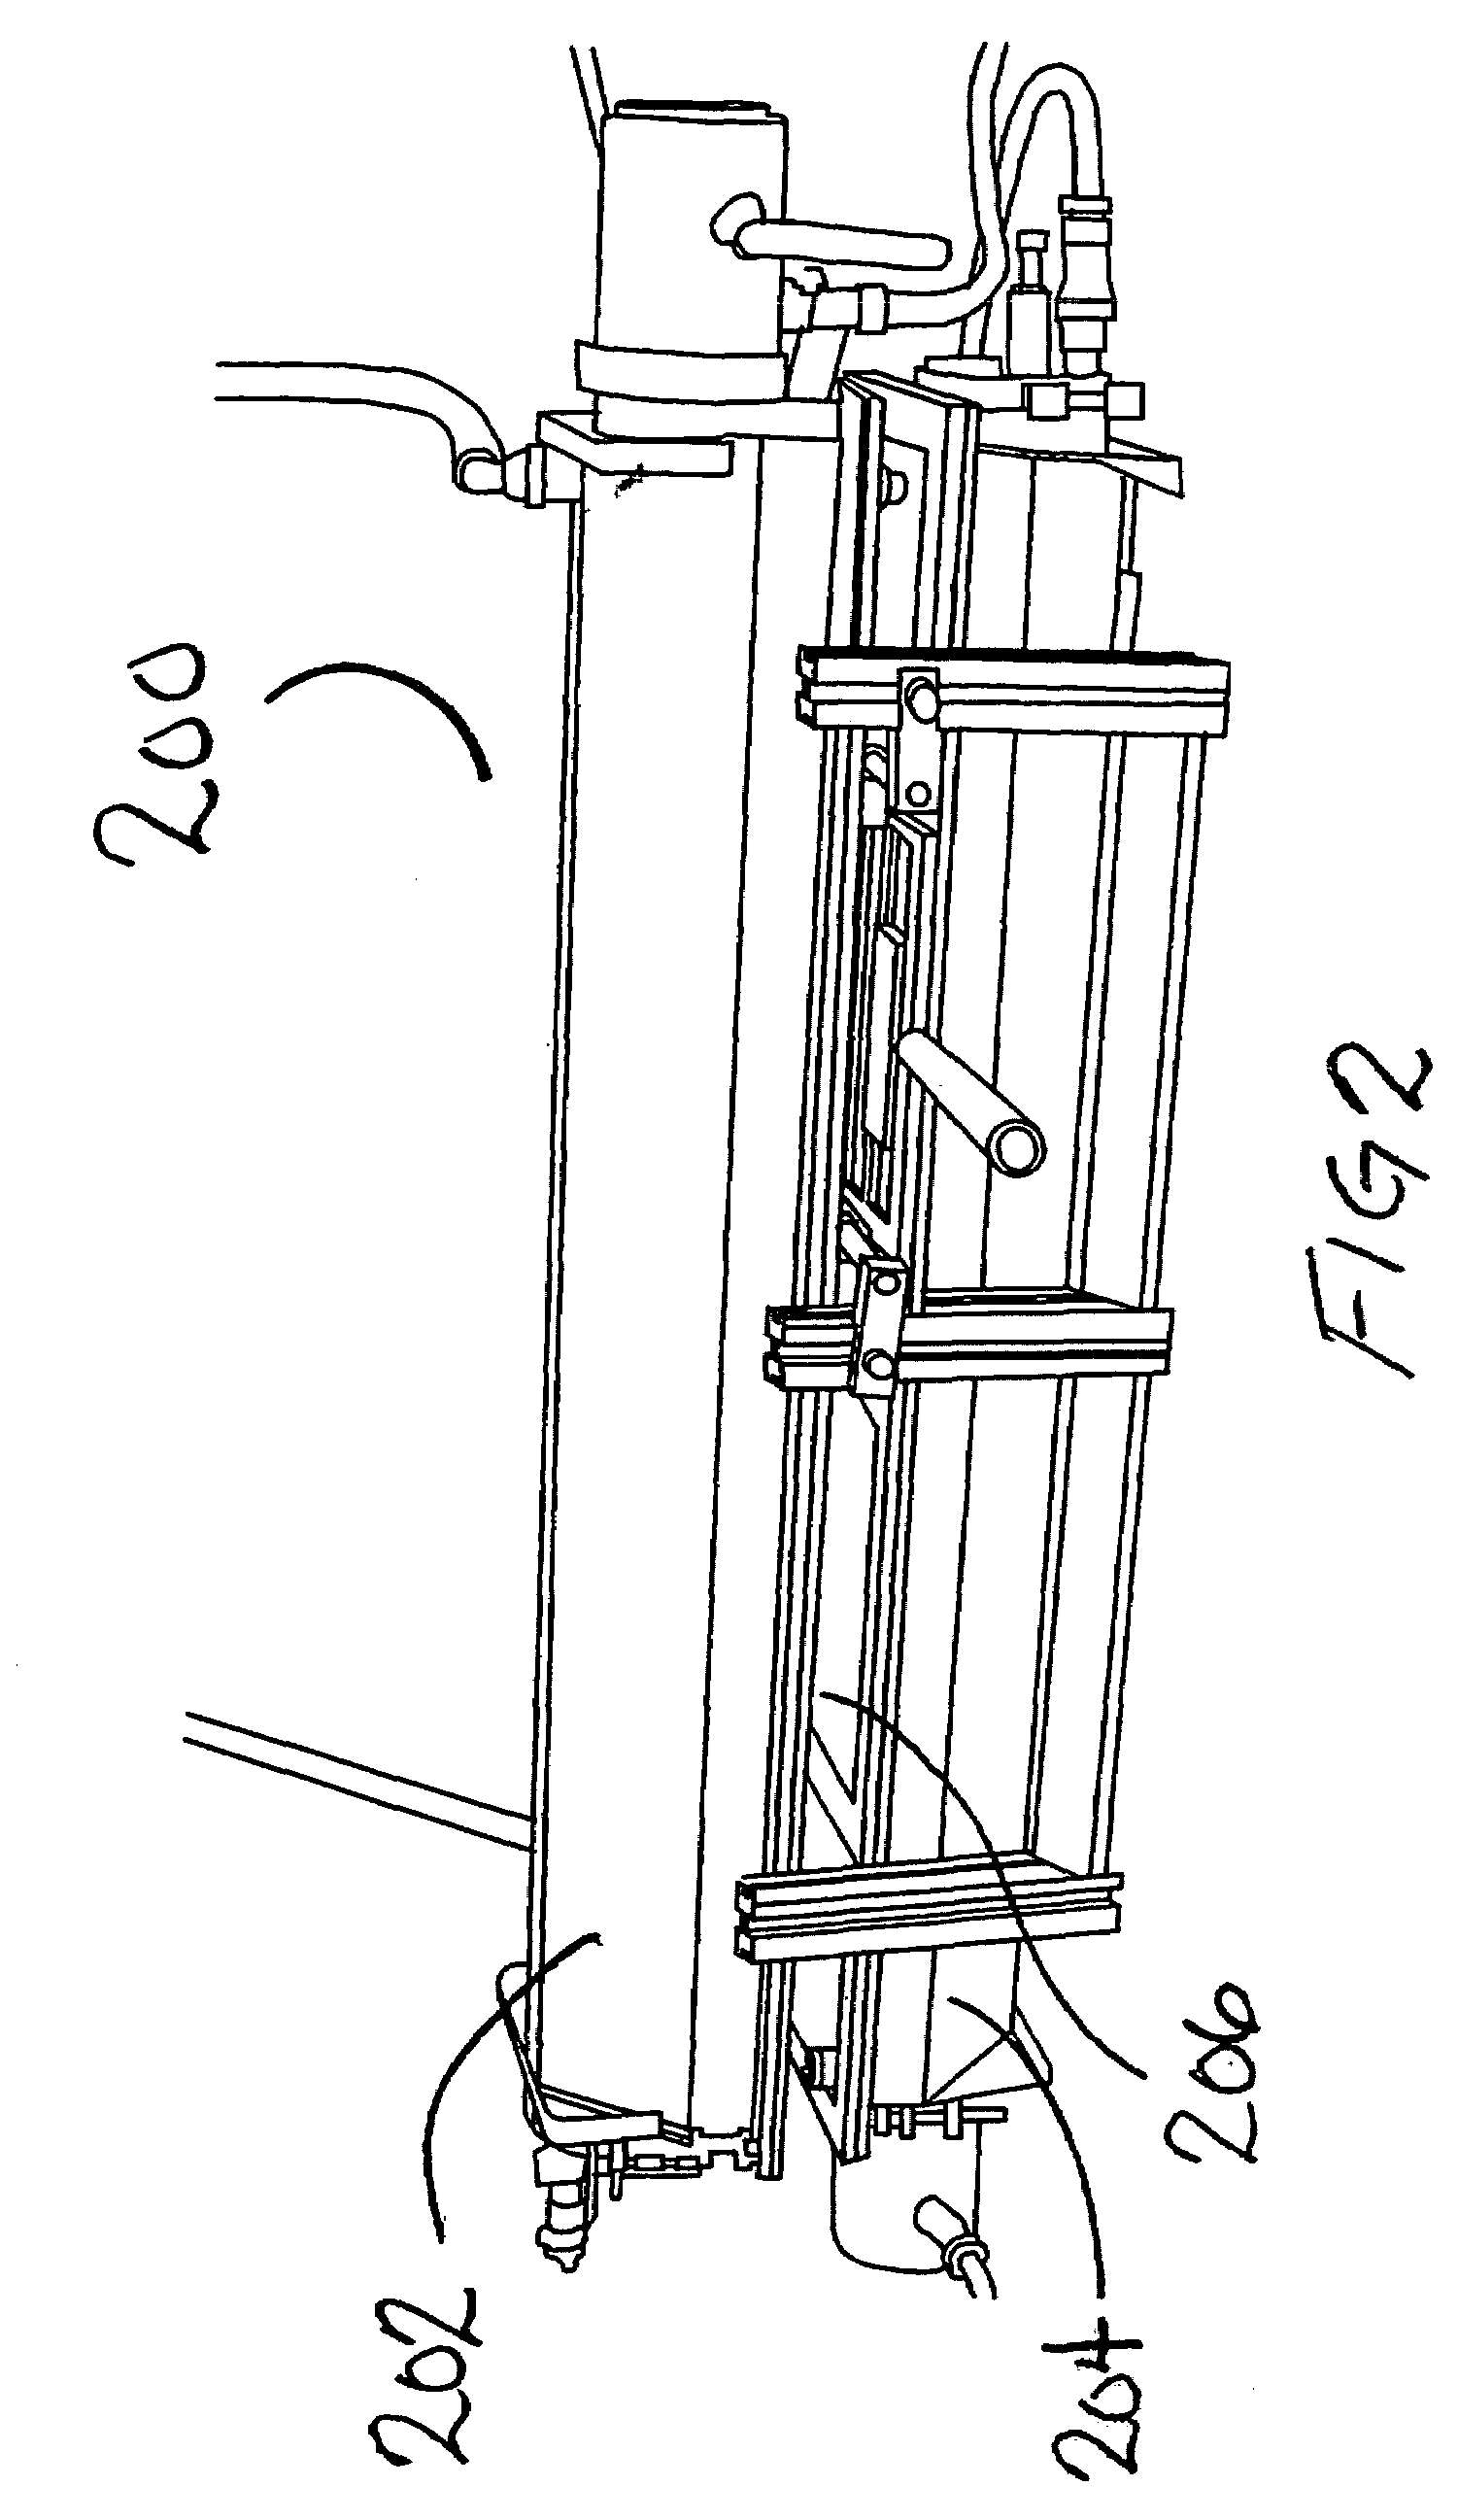 System and method for product sterilization using UV light source